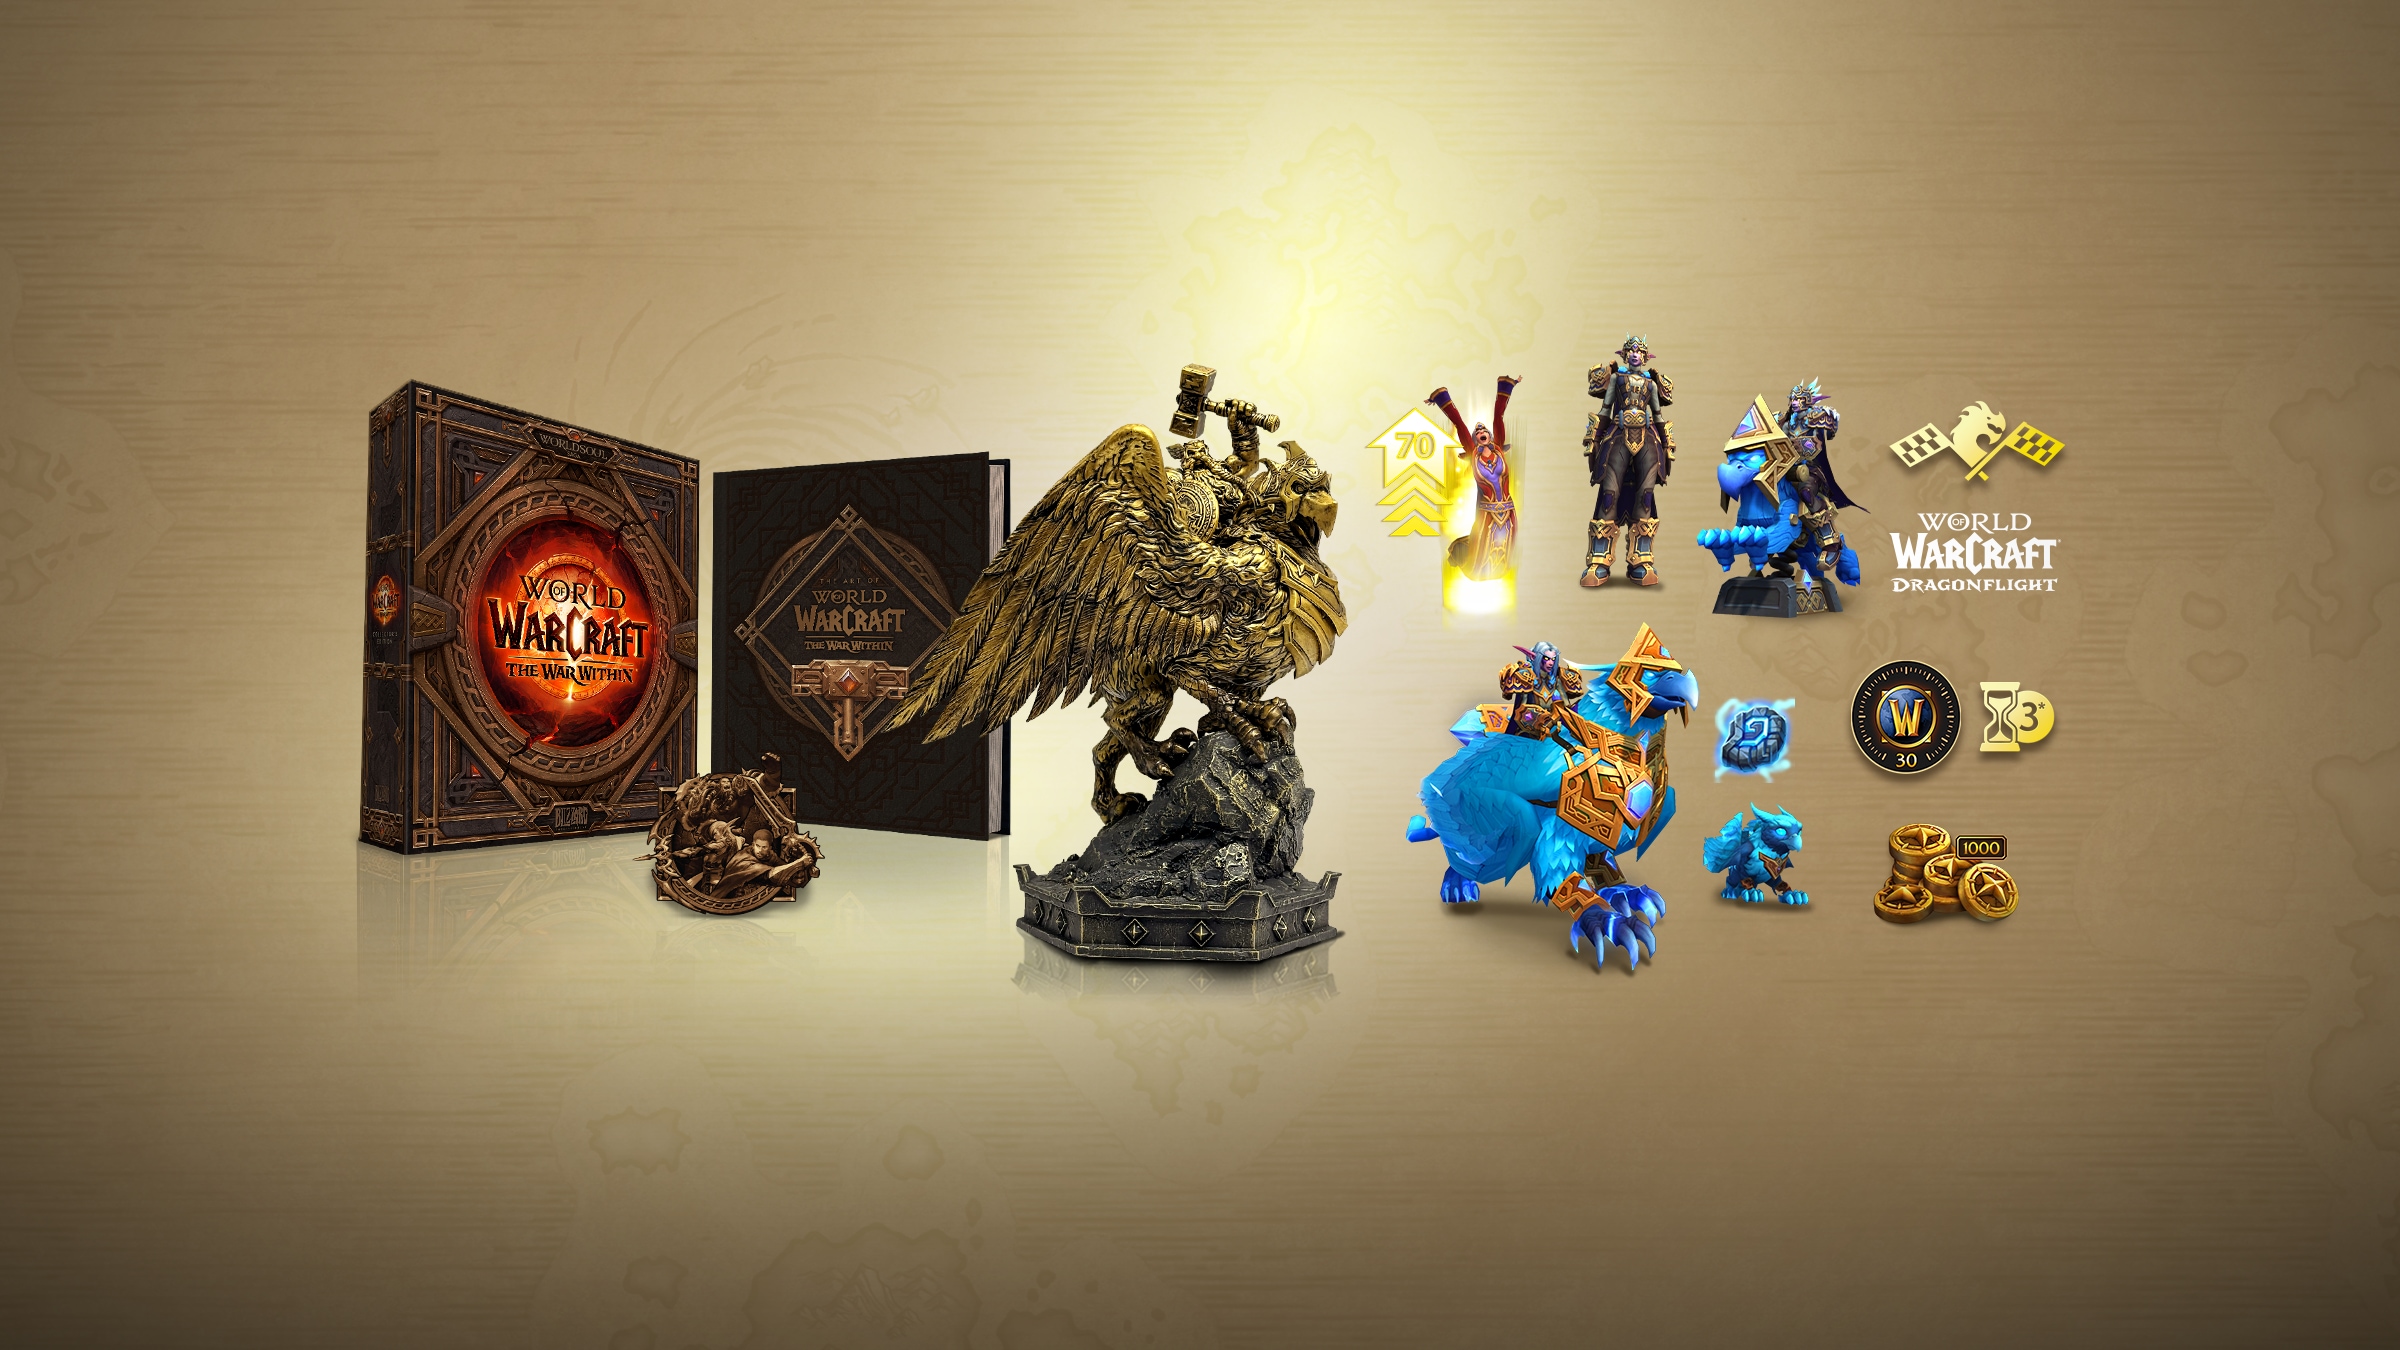 Precompra la World of Warcraft®: The War Within™ 20th Anniversary Collector's Edition